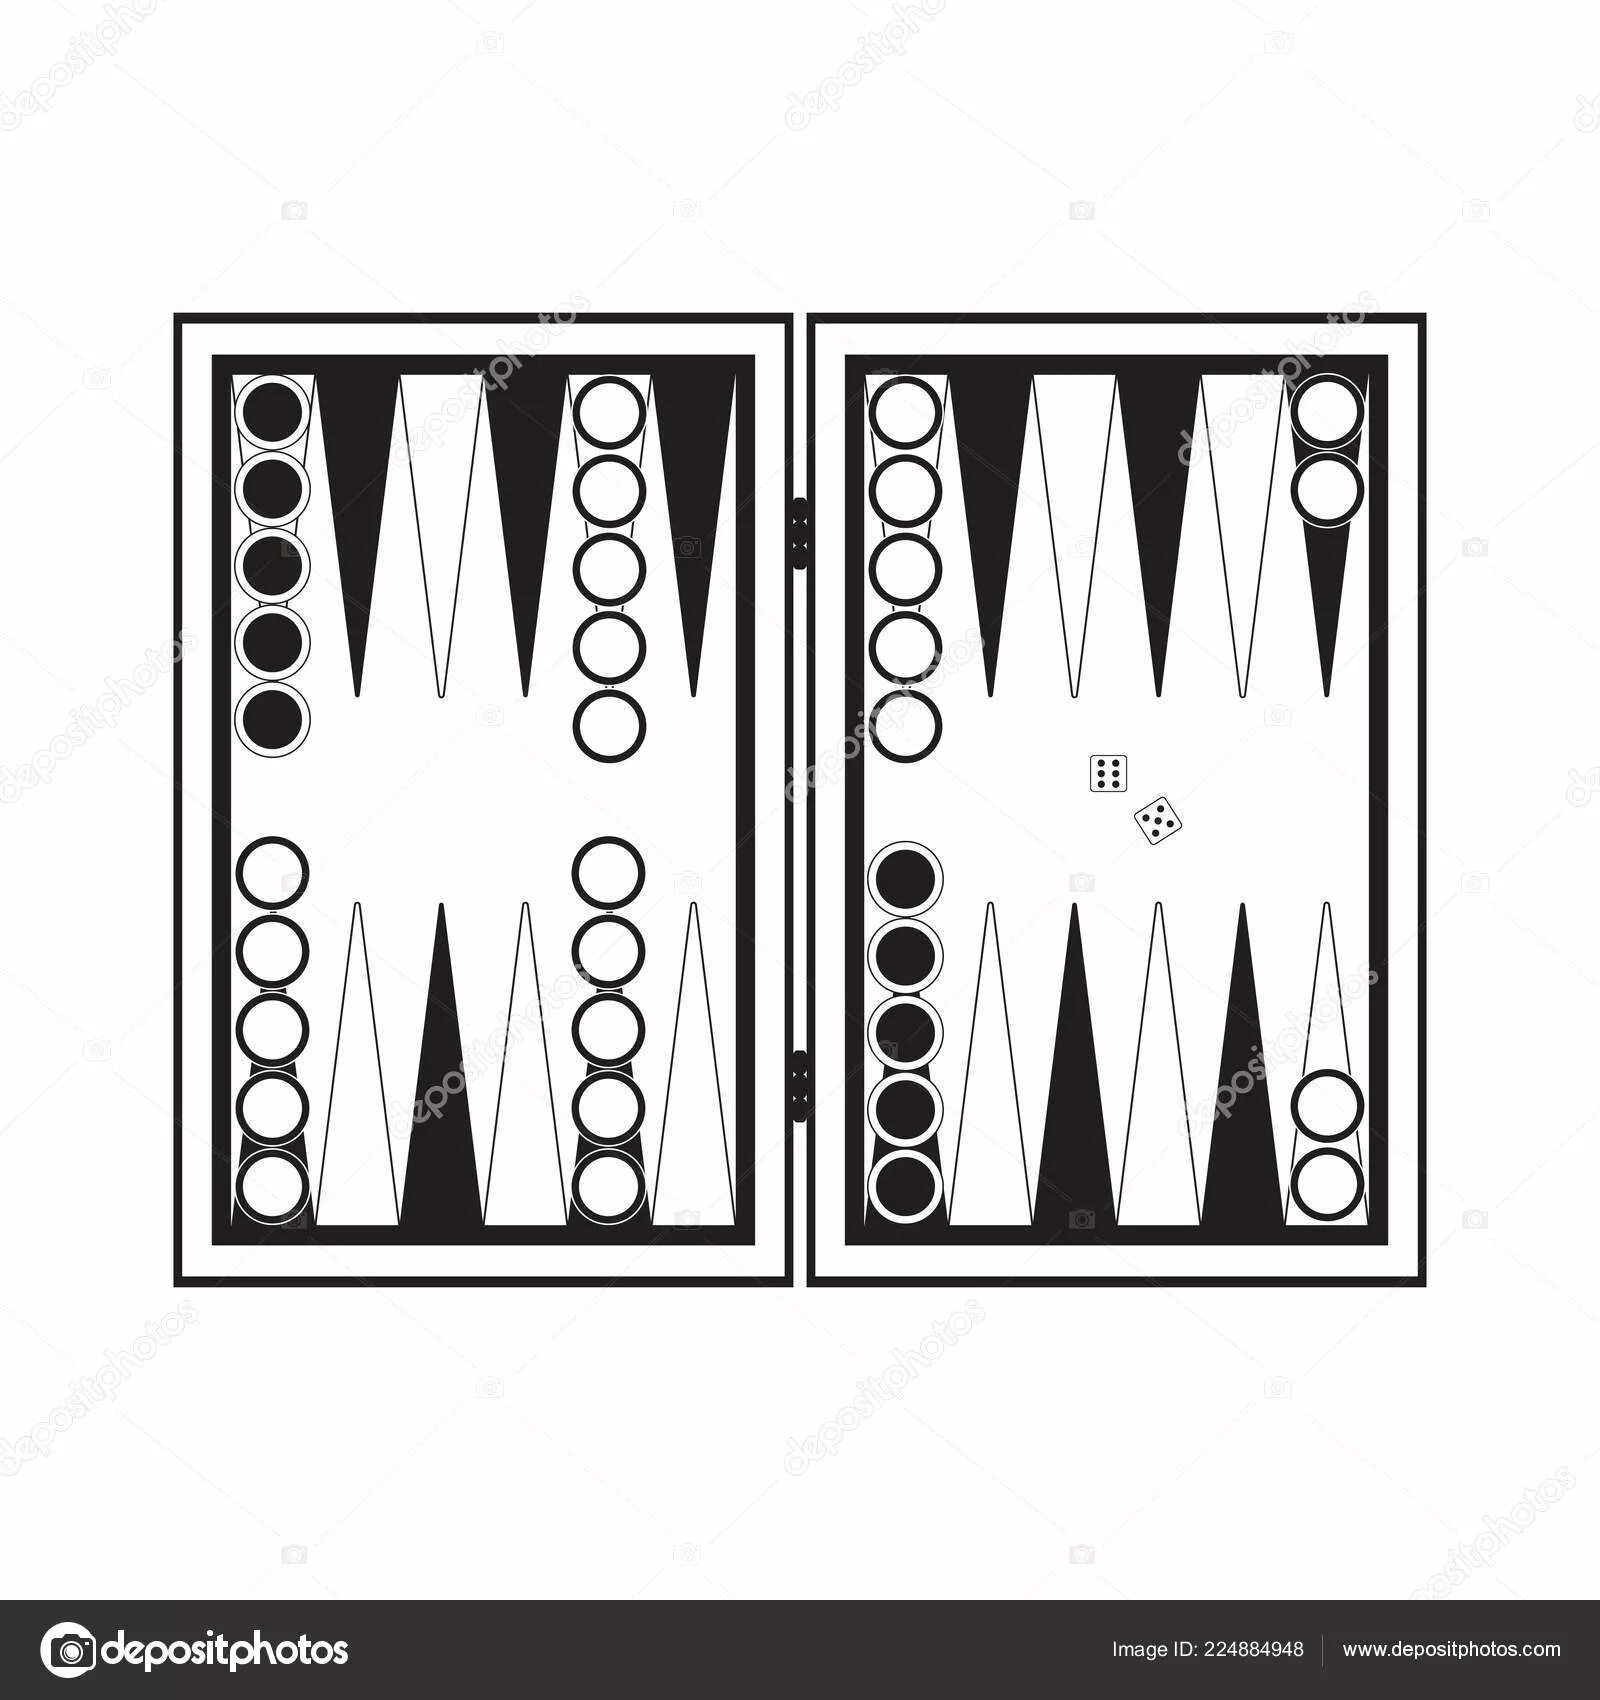 Amazing backgammon coloring page